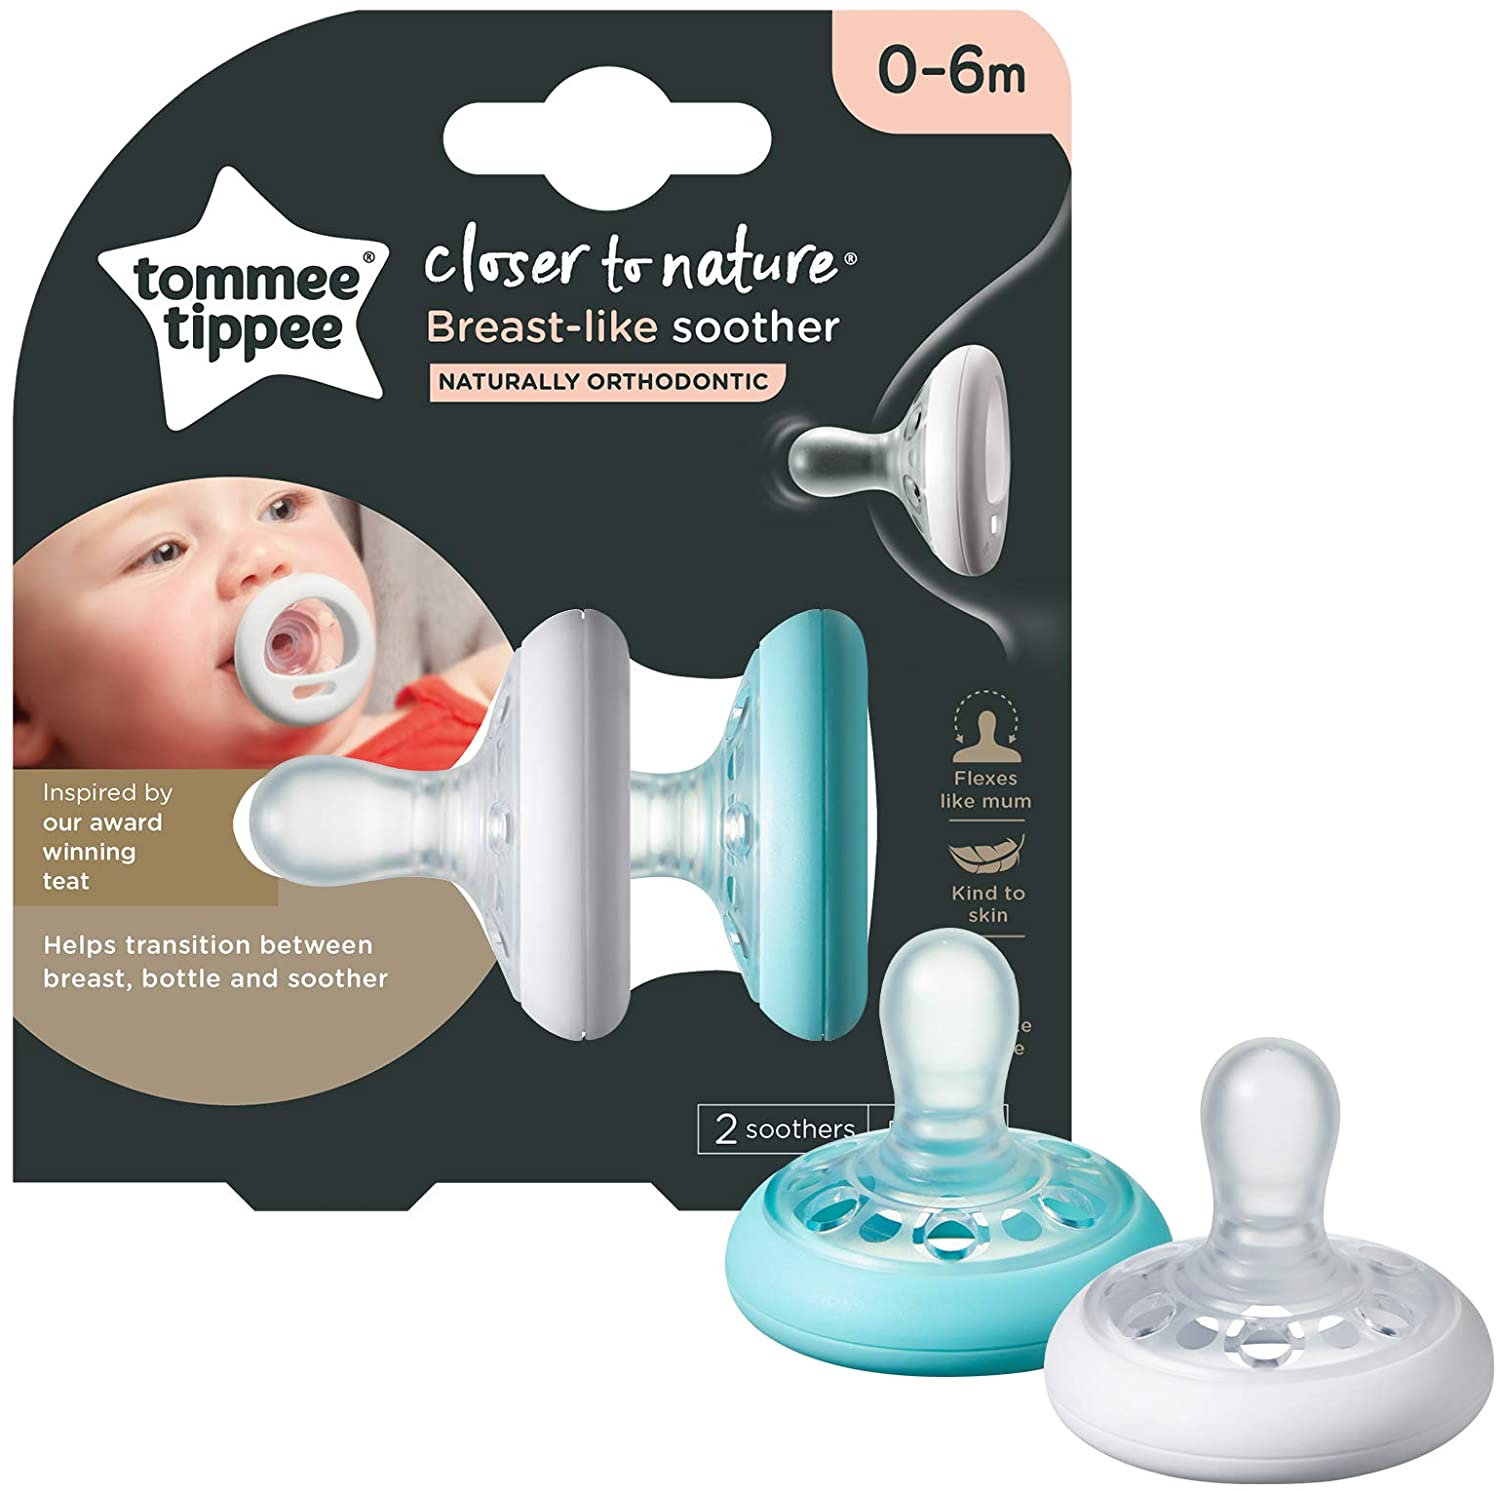 Buy Tommee Tippee Closer To Nature Breast Like Soother, Pack of 2, (0-6 months) for SAR 39.00 | Mamas & Papas SA